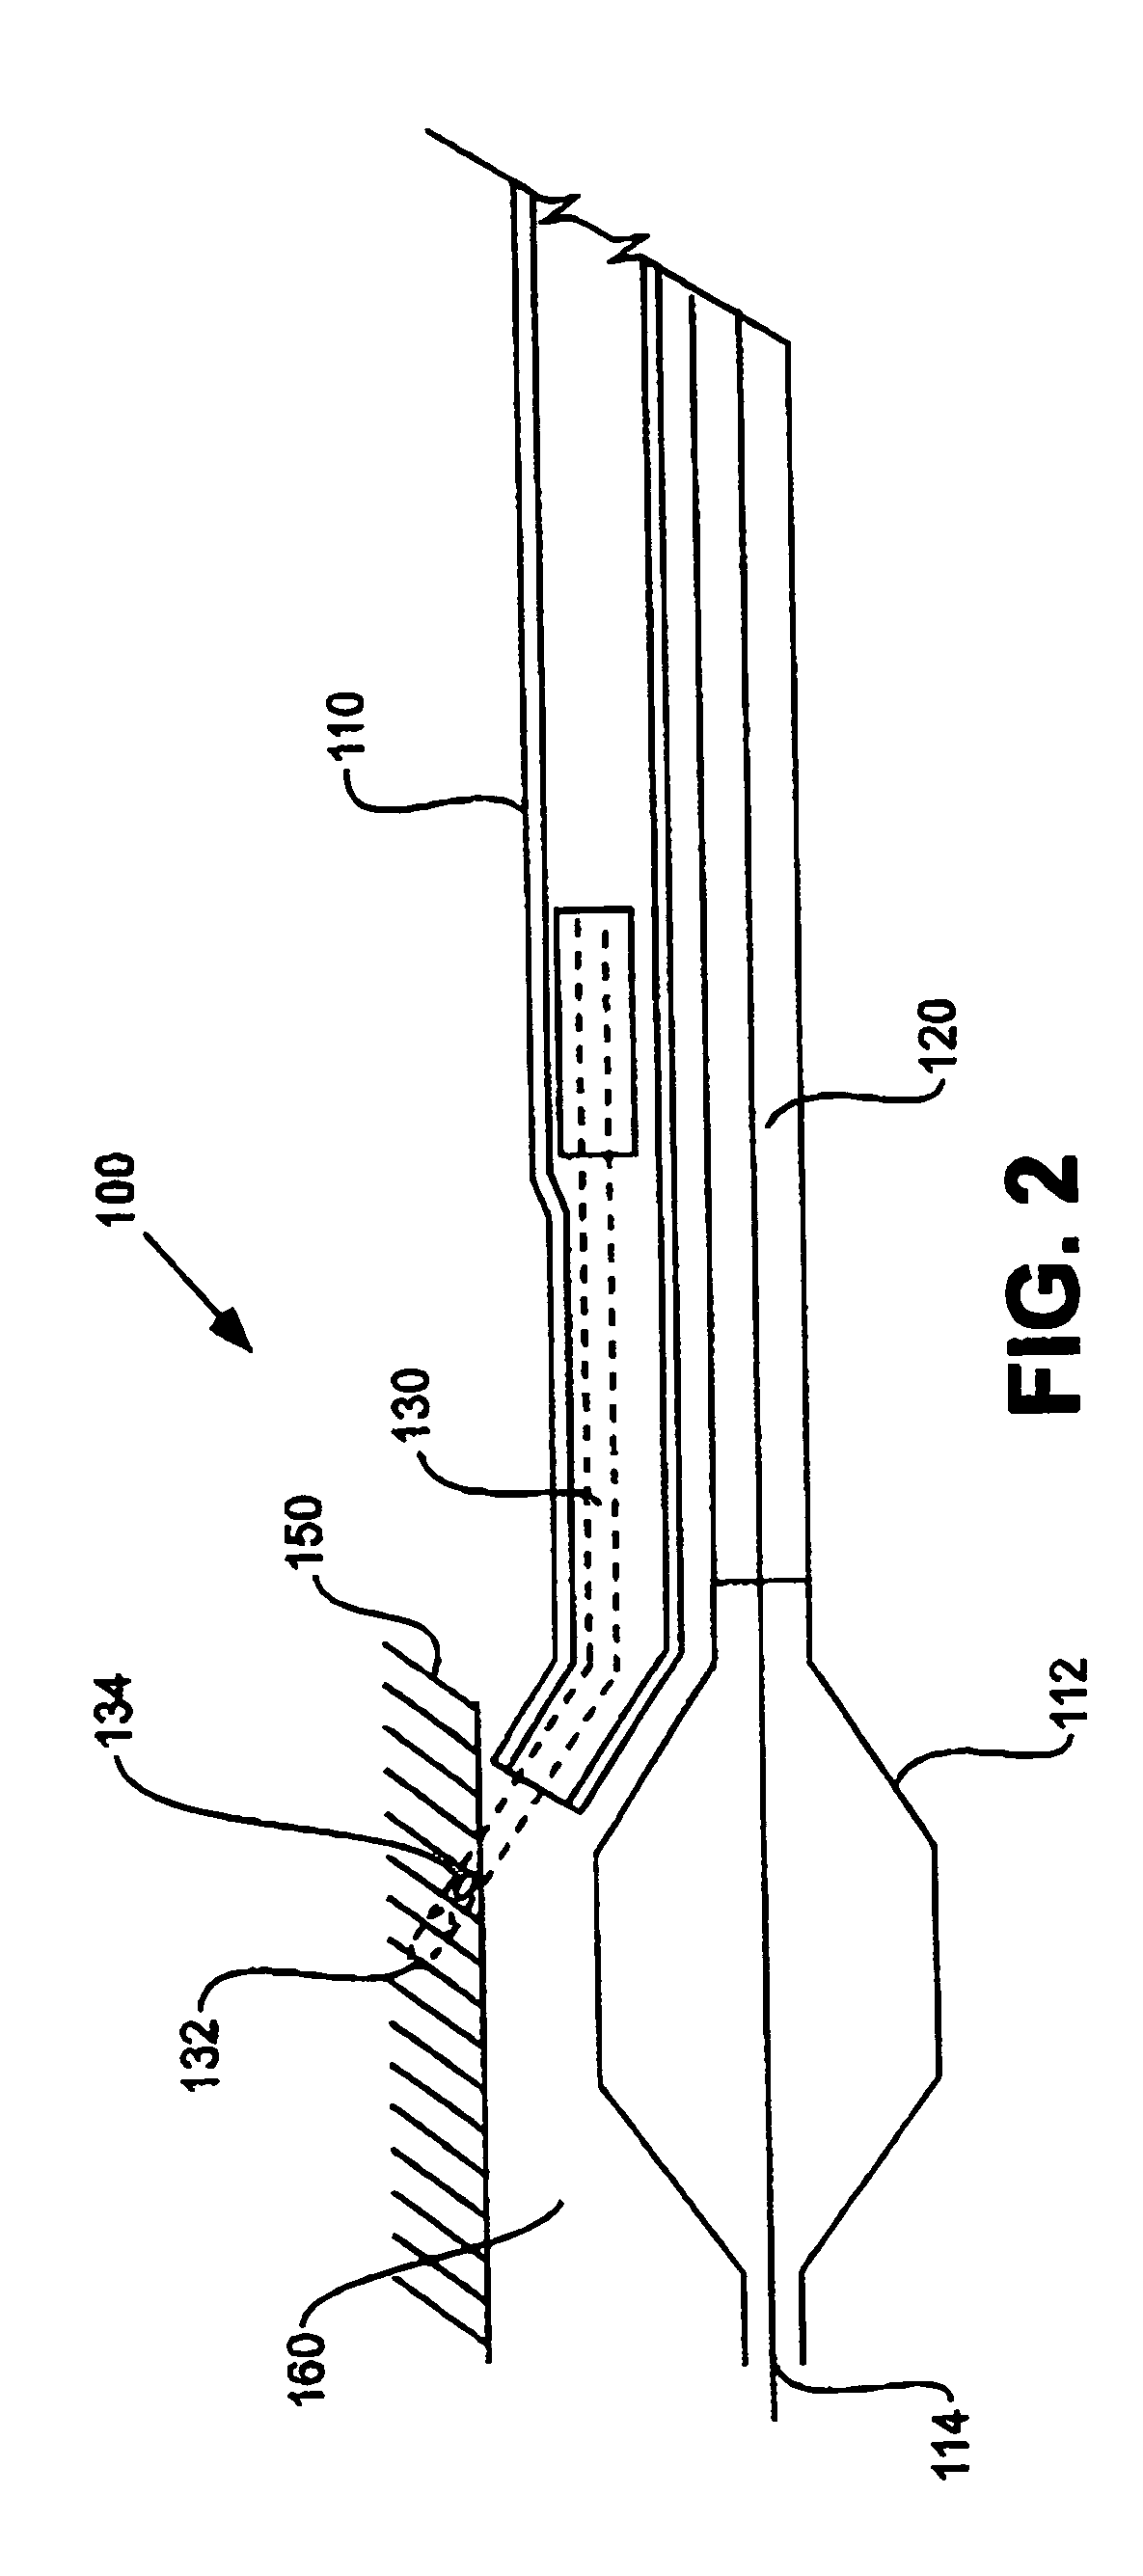 Systems and methods for detecting tissue contact and needle penetration depth